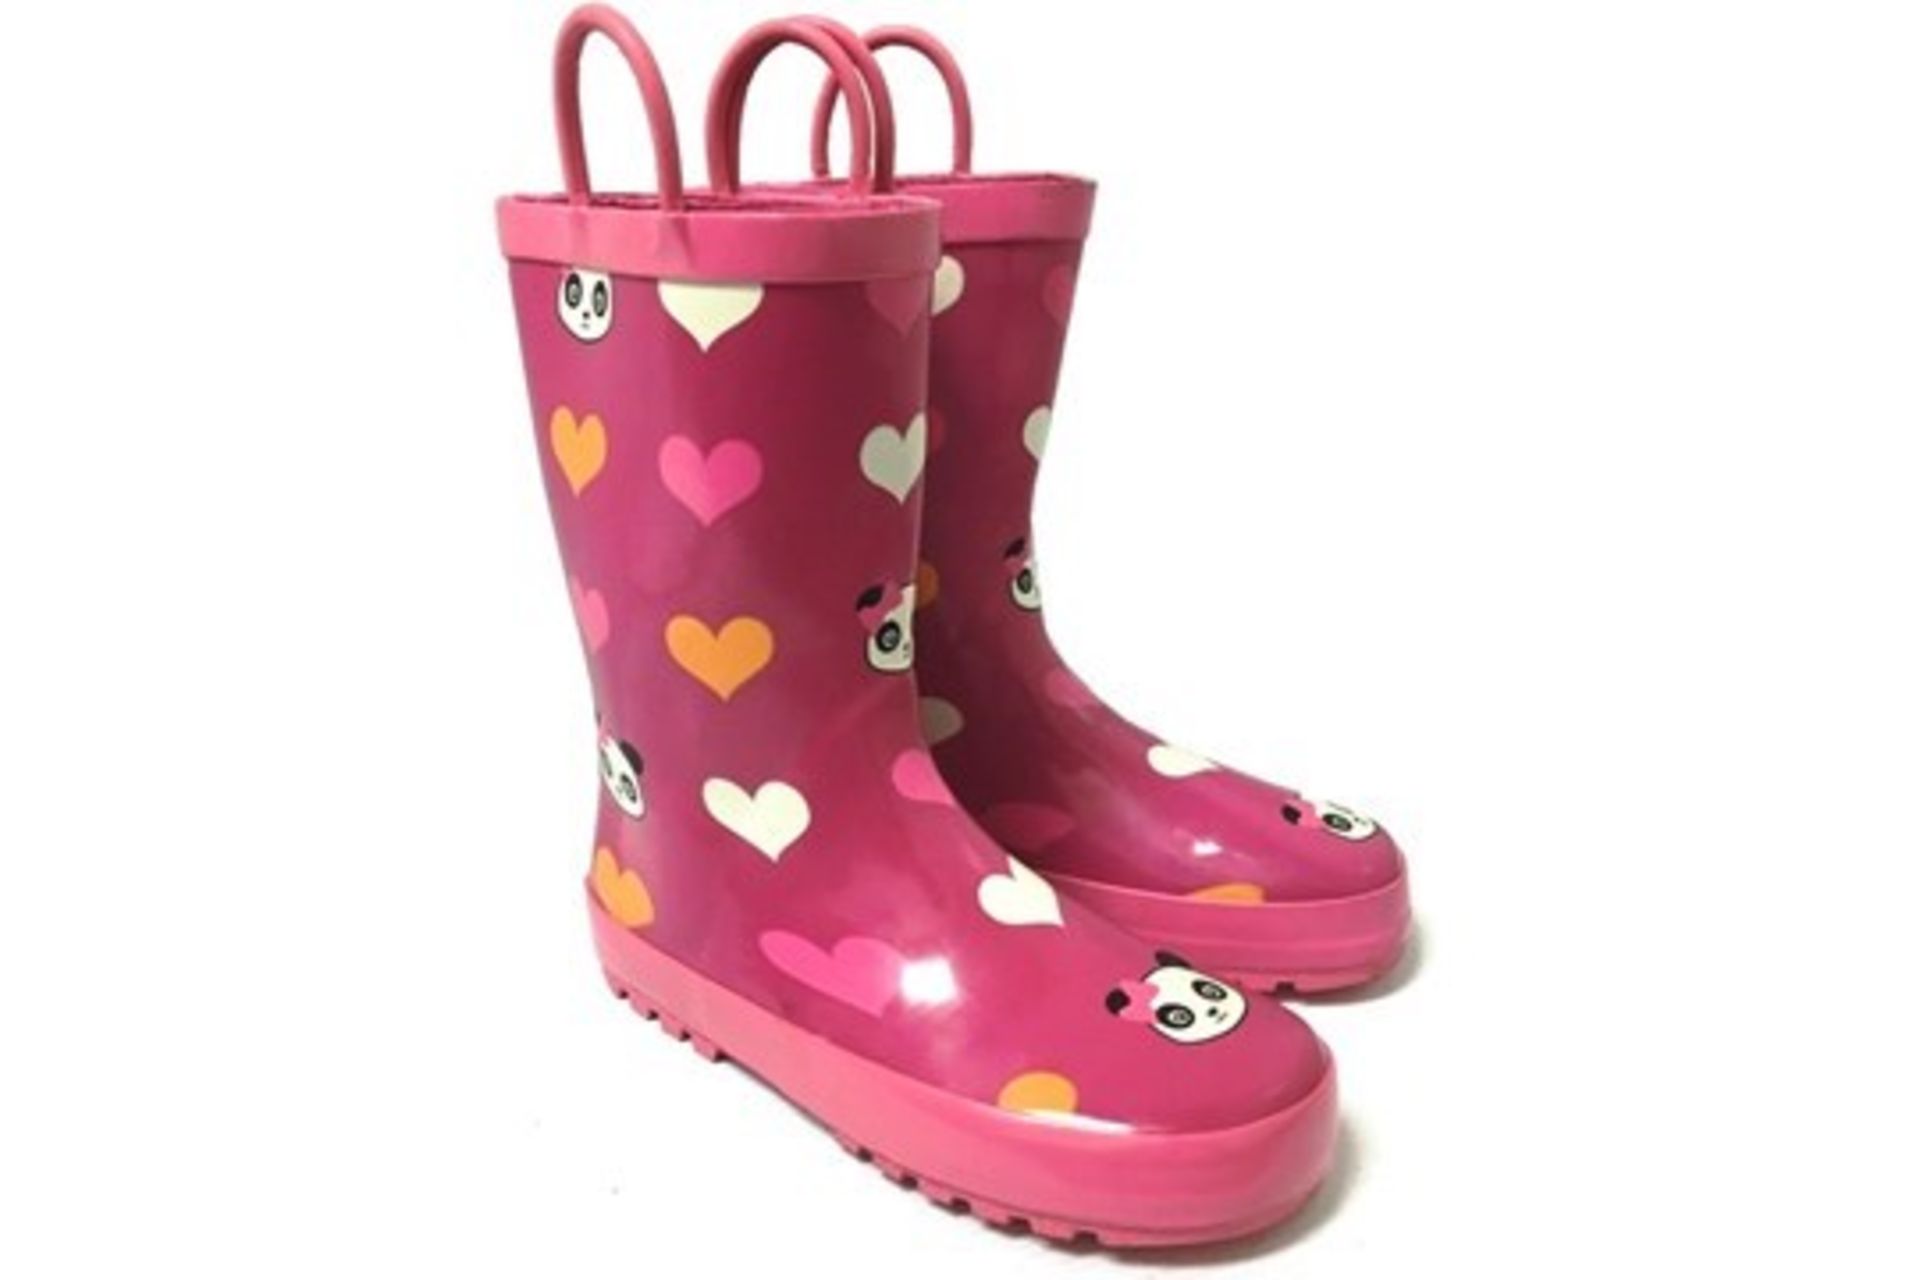 Brand New Pair of Gymboree Size EU29 Panda and Hearts Kids Wellington Boots with Handles RRP £16